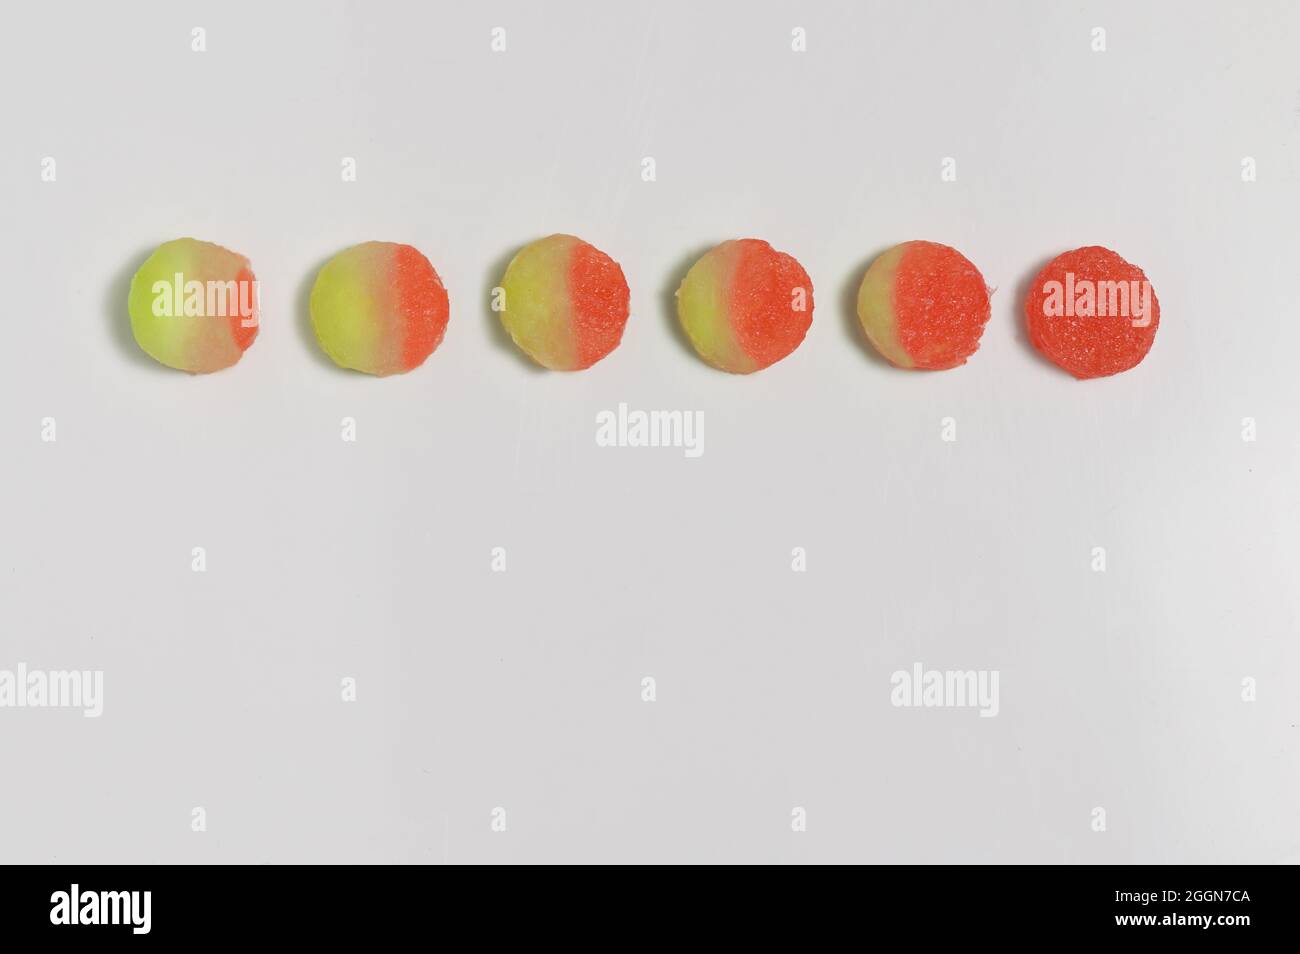 Abstract Phases Of The Moon from Watermelon Slices Stock Photo